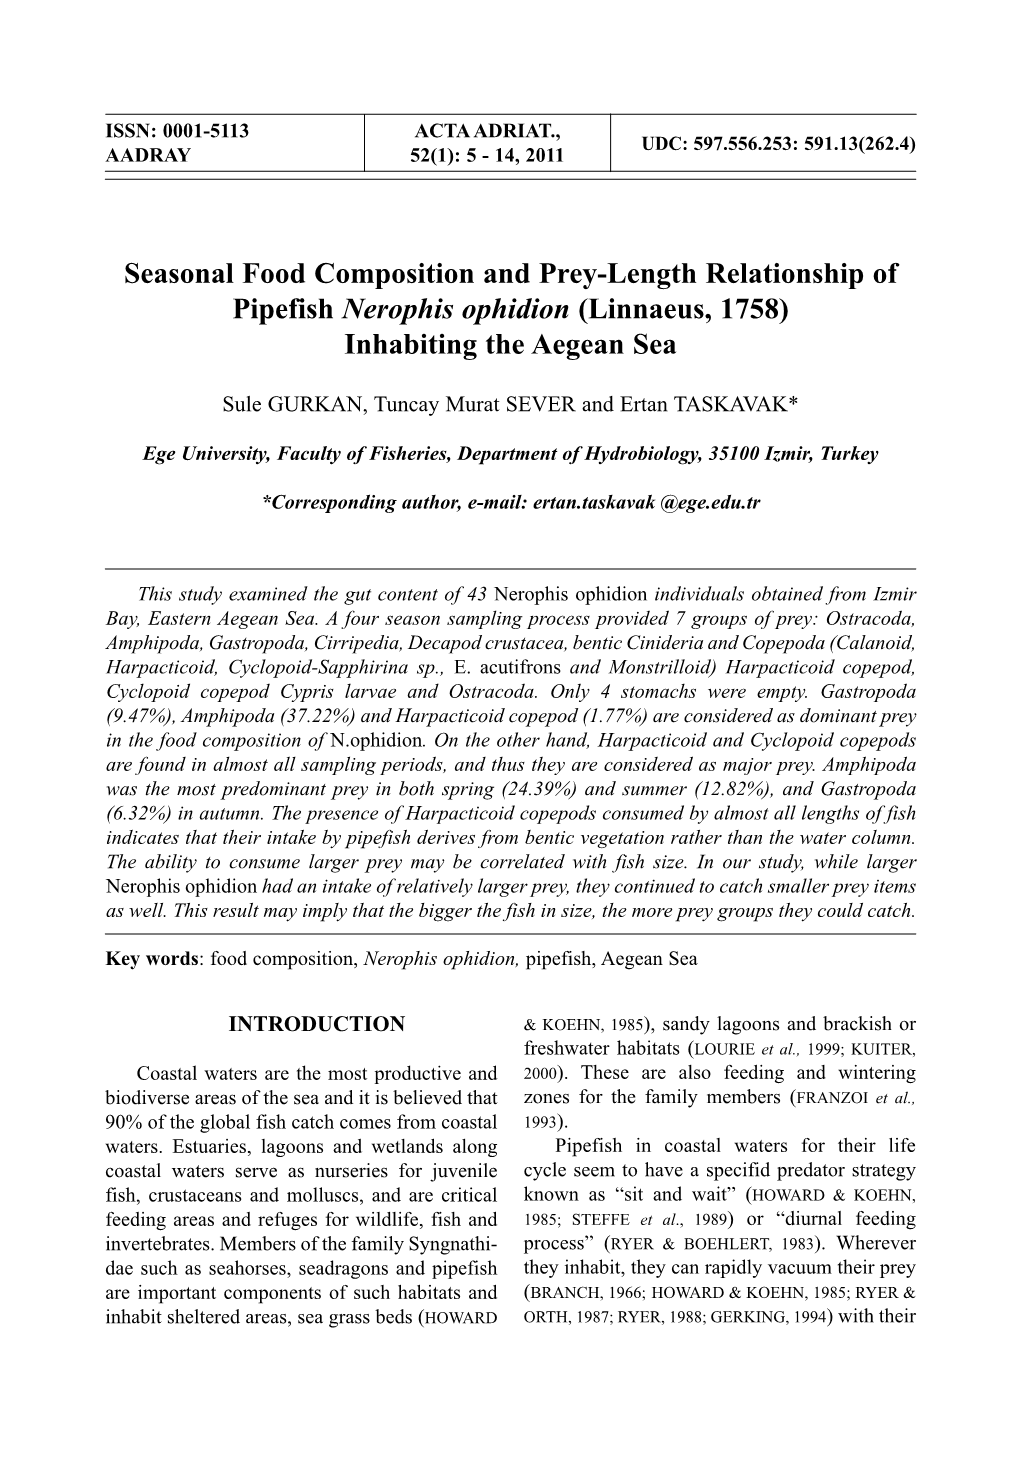 Seasonal Food Composition and Prey-Length Relationship of Pipefish Nerophis Ophidion (Linnaeus, 1758) Inhabiting the Aegean Sea